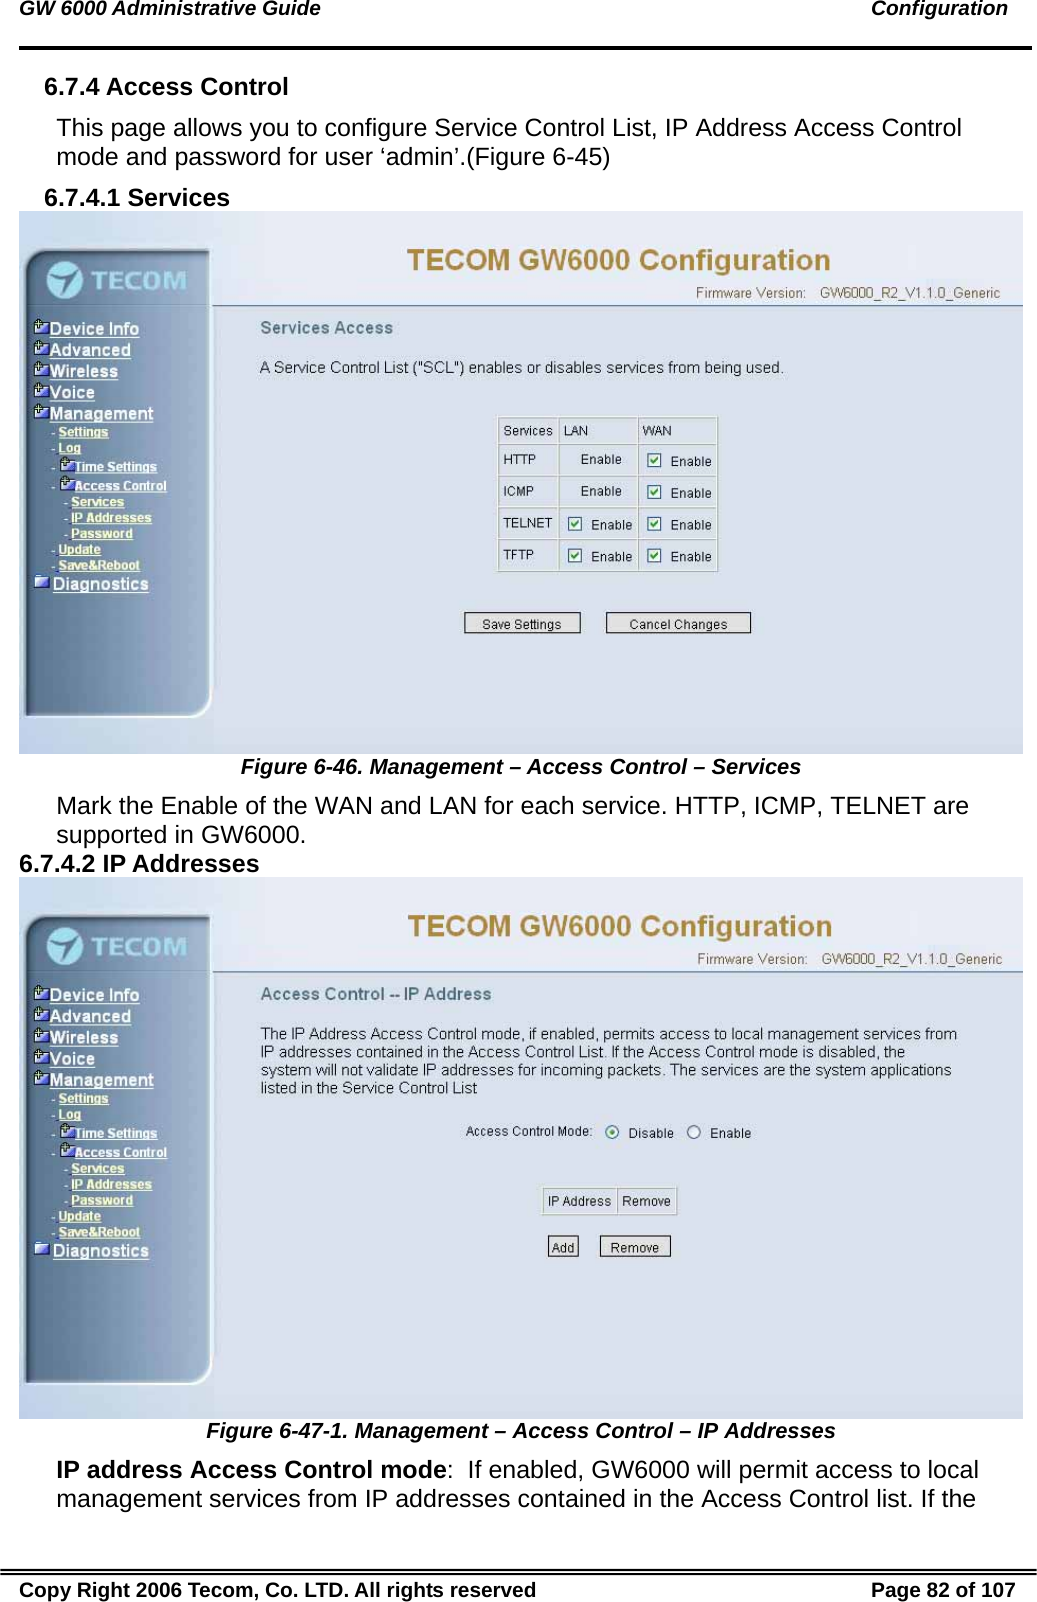 GW 6000 Administrative Guide                                                                                               Configuration 6.7.4 Access Control This page allows you to configure Service Control List, IP Address Access Control mode and password for user ‘admin’.(Figure 6-45) 6.7.4.1 Services  Figure 6-46. Management – Access Control – Services Mark the Enable of the WAN and LAN for each service. HTTP, ICMP, TELNET are supported in GW6000. 6.7.4.2 IP Addresses  Figure 6-47-1. Management – Access Control – IP Addresses IP address Access Control mode:  If enabled, GW6000 will permit access to local management services from IP addresses contained in the Access Control list. If the Copy Right 2006 Tecom, Co. LTD. All rights reserved  Page 82 of 107 